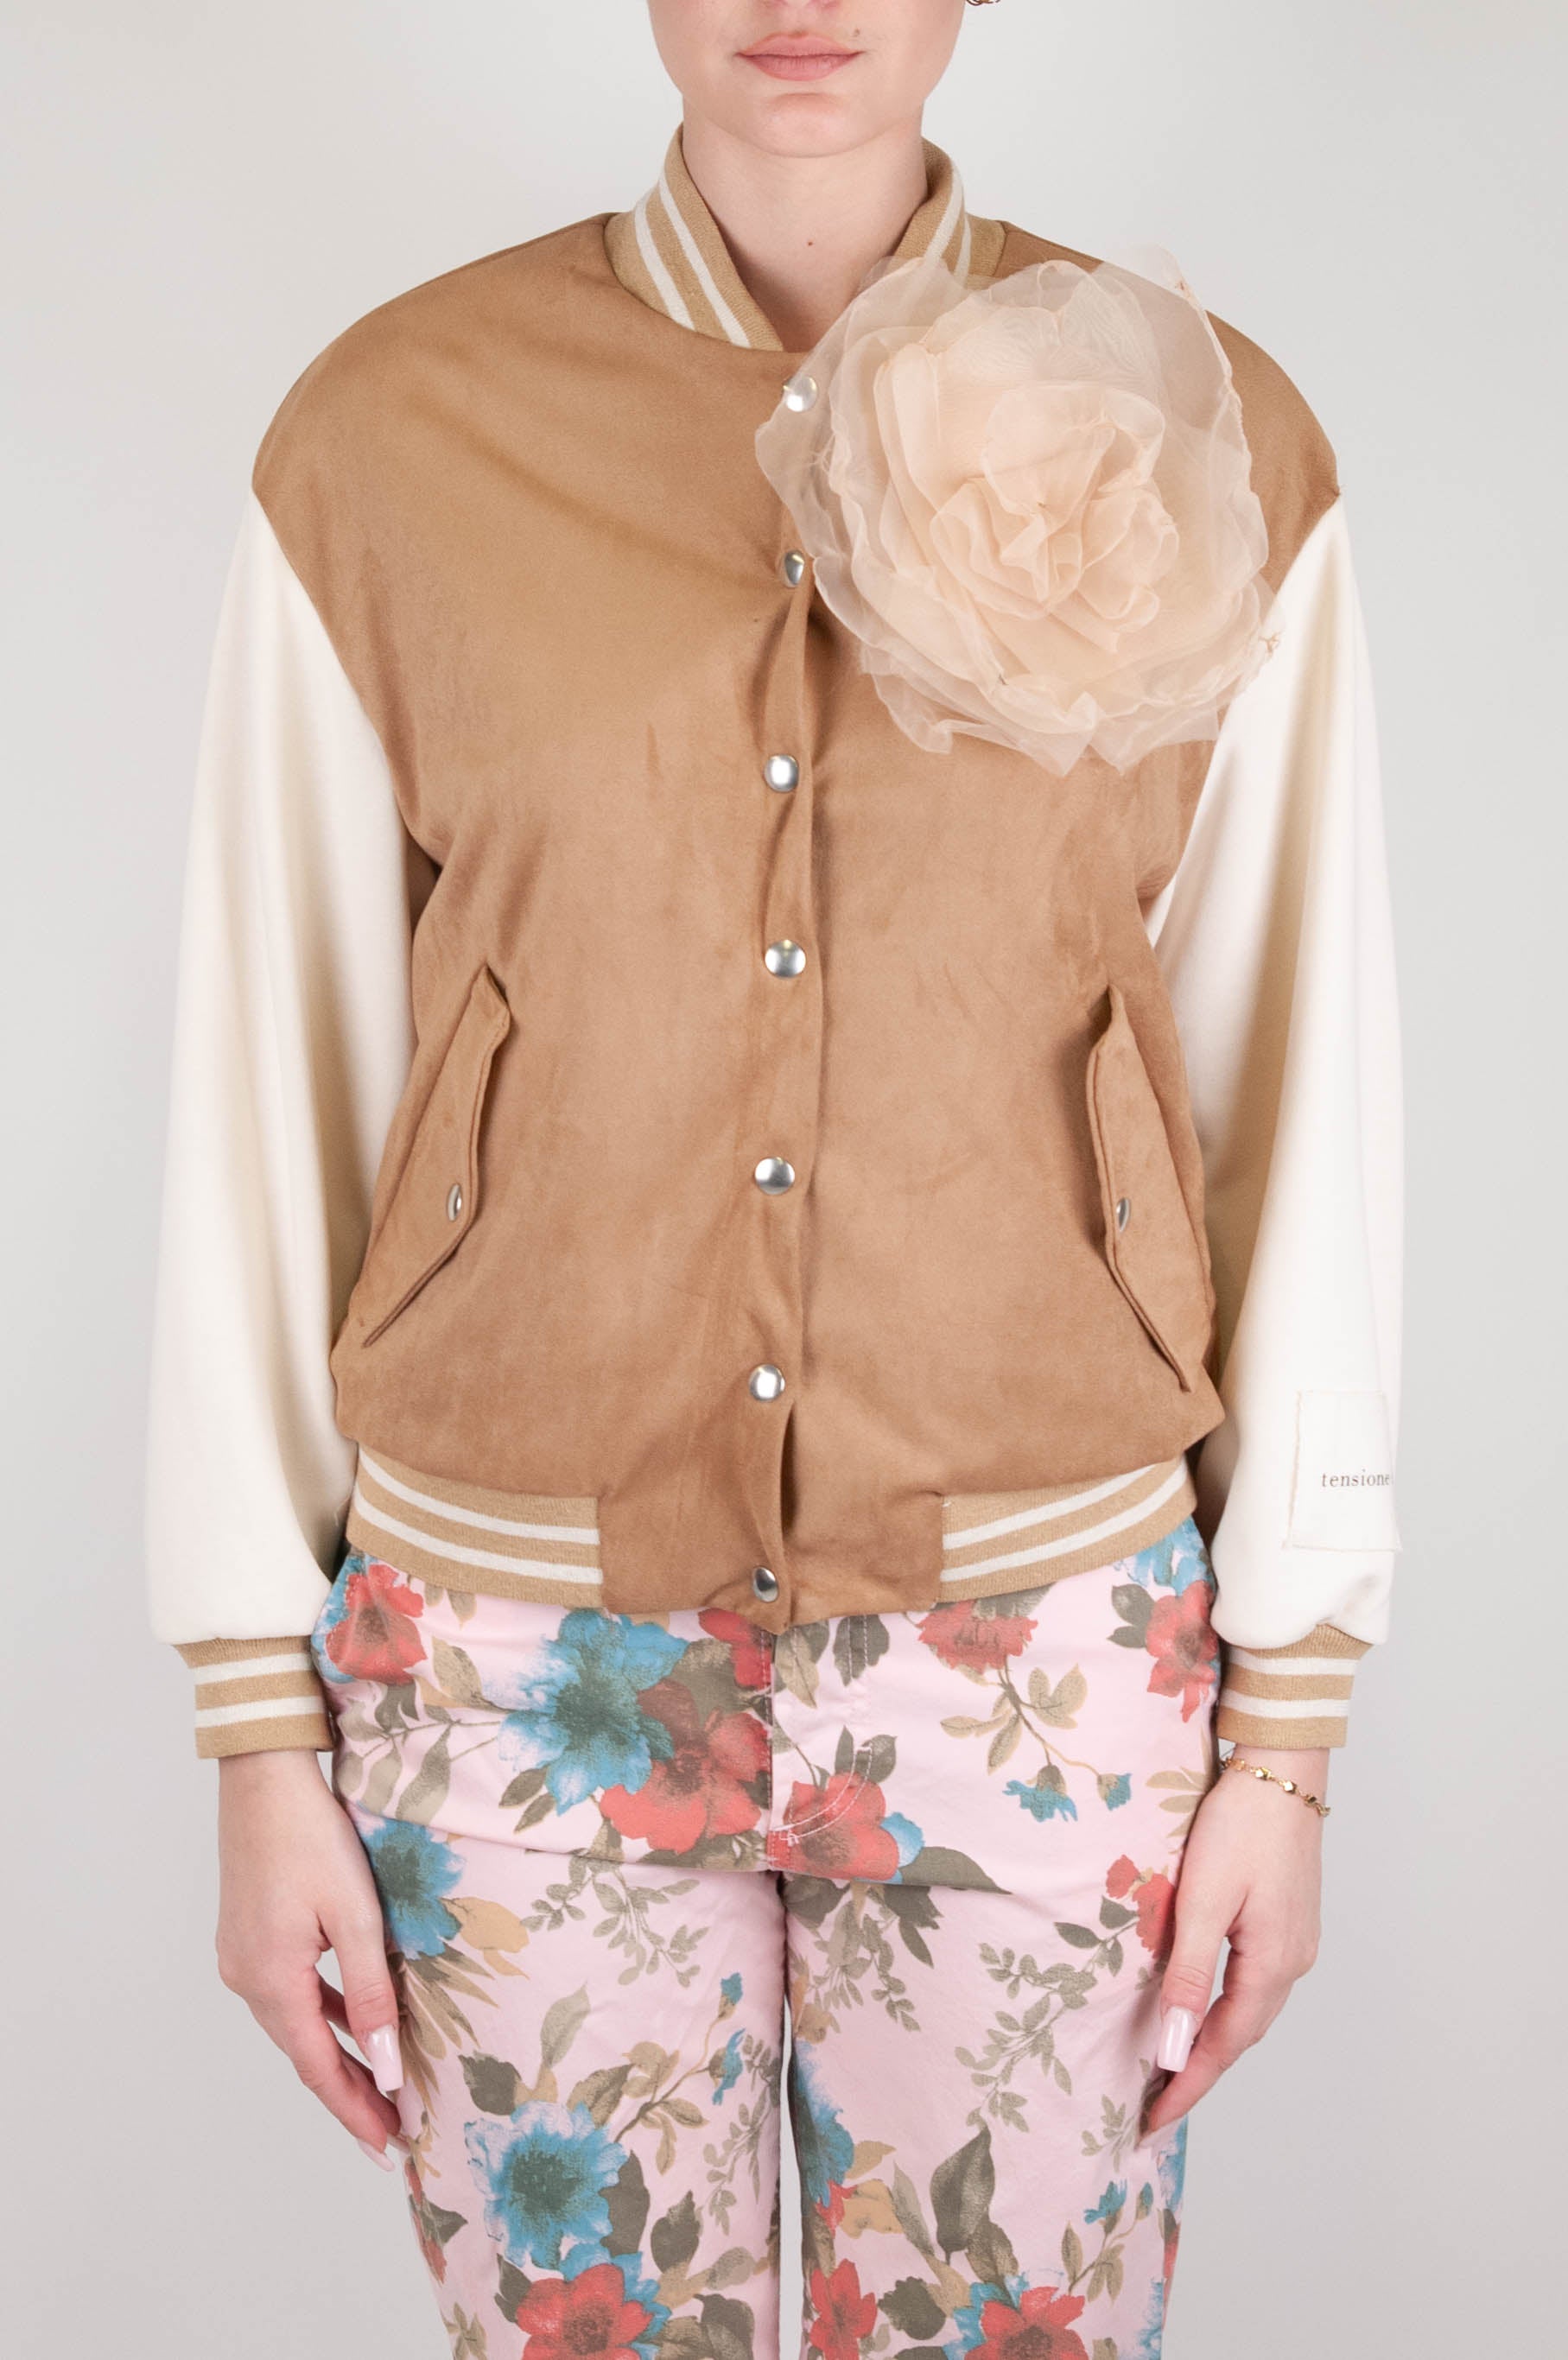 Tension in - Bomber jacket with contrasting sleeves and flower brooch